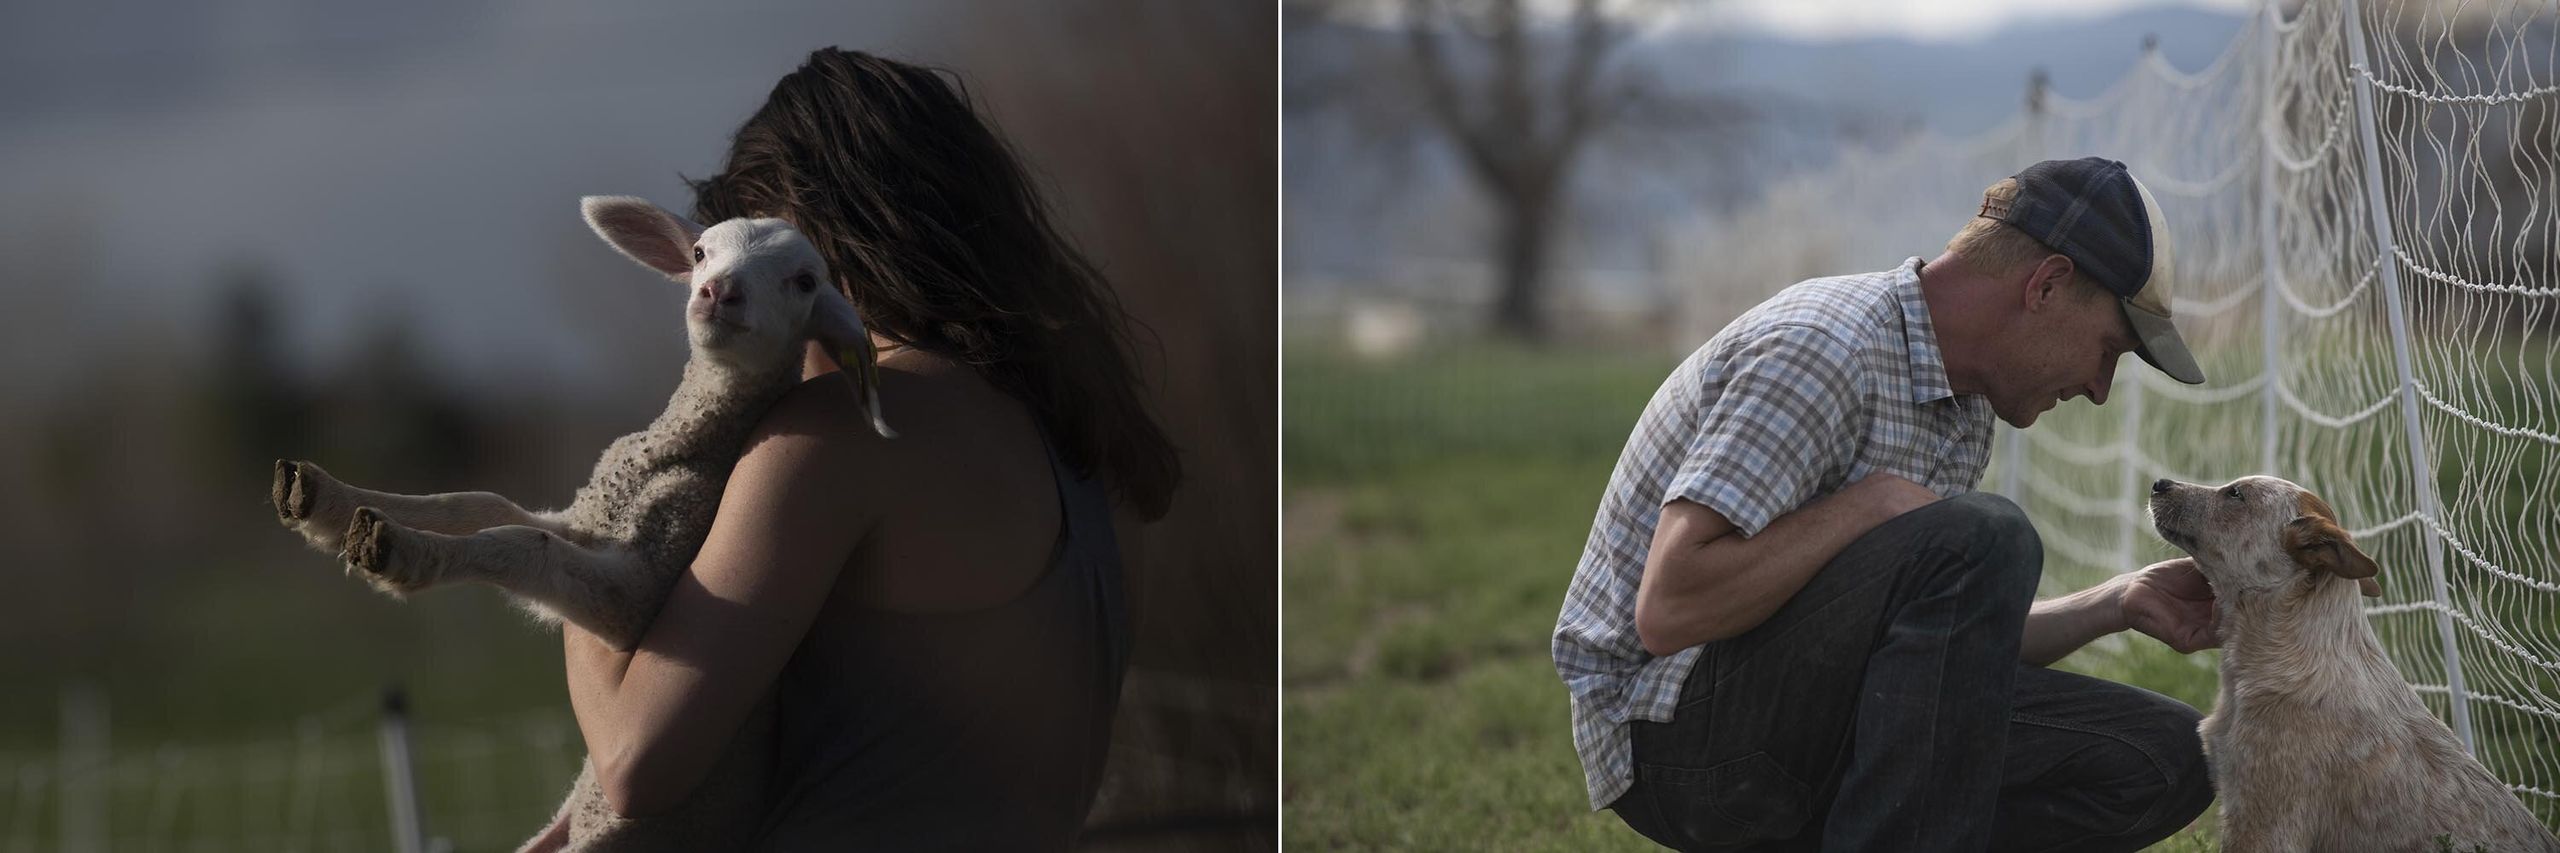 Left: A lamb sits in the arms of Chloe Johnson on May 1 at SkyPilot Farm in Longmont, Colorado. Right: Craig Scariot with his